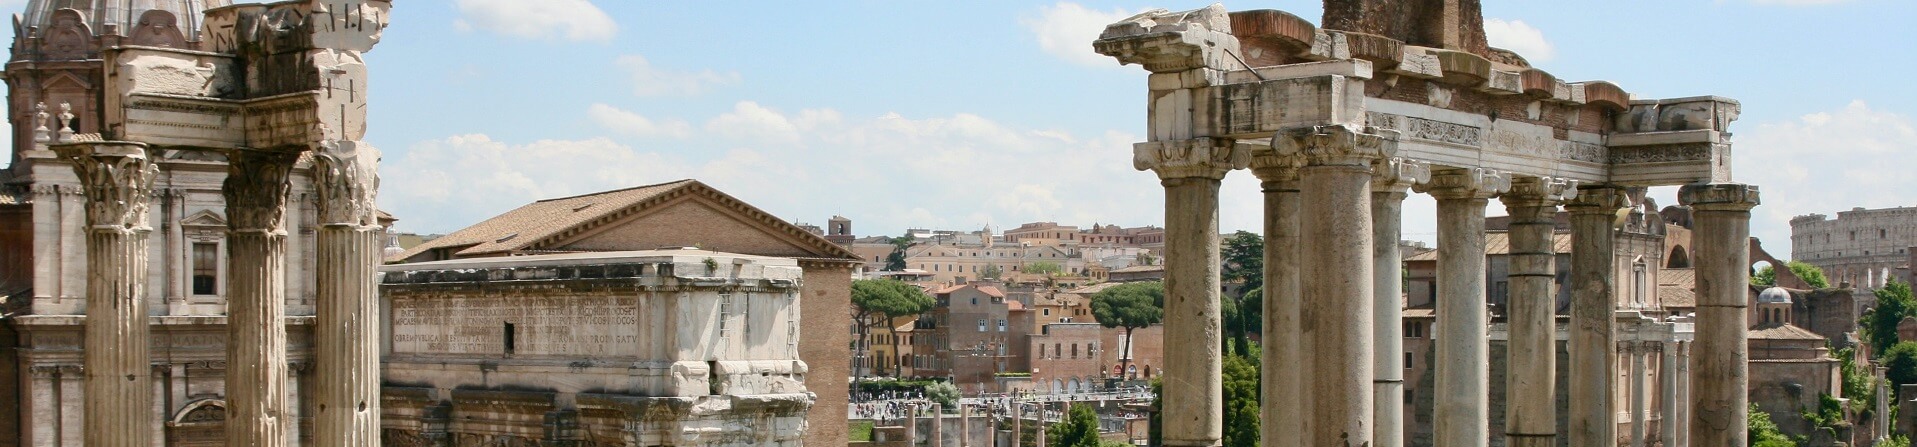 What was the Roman Forum used for?